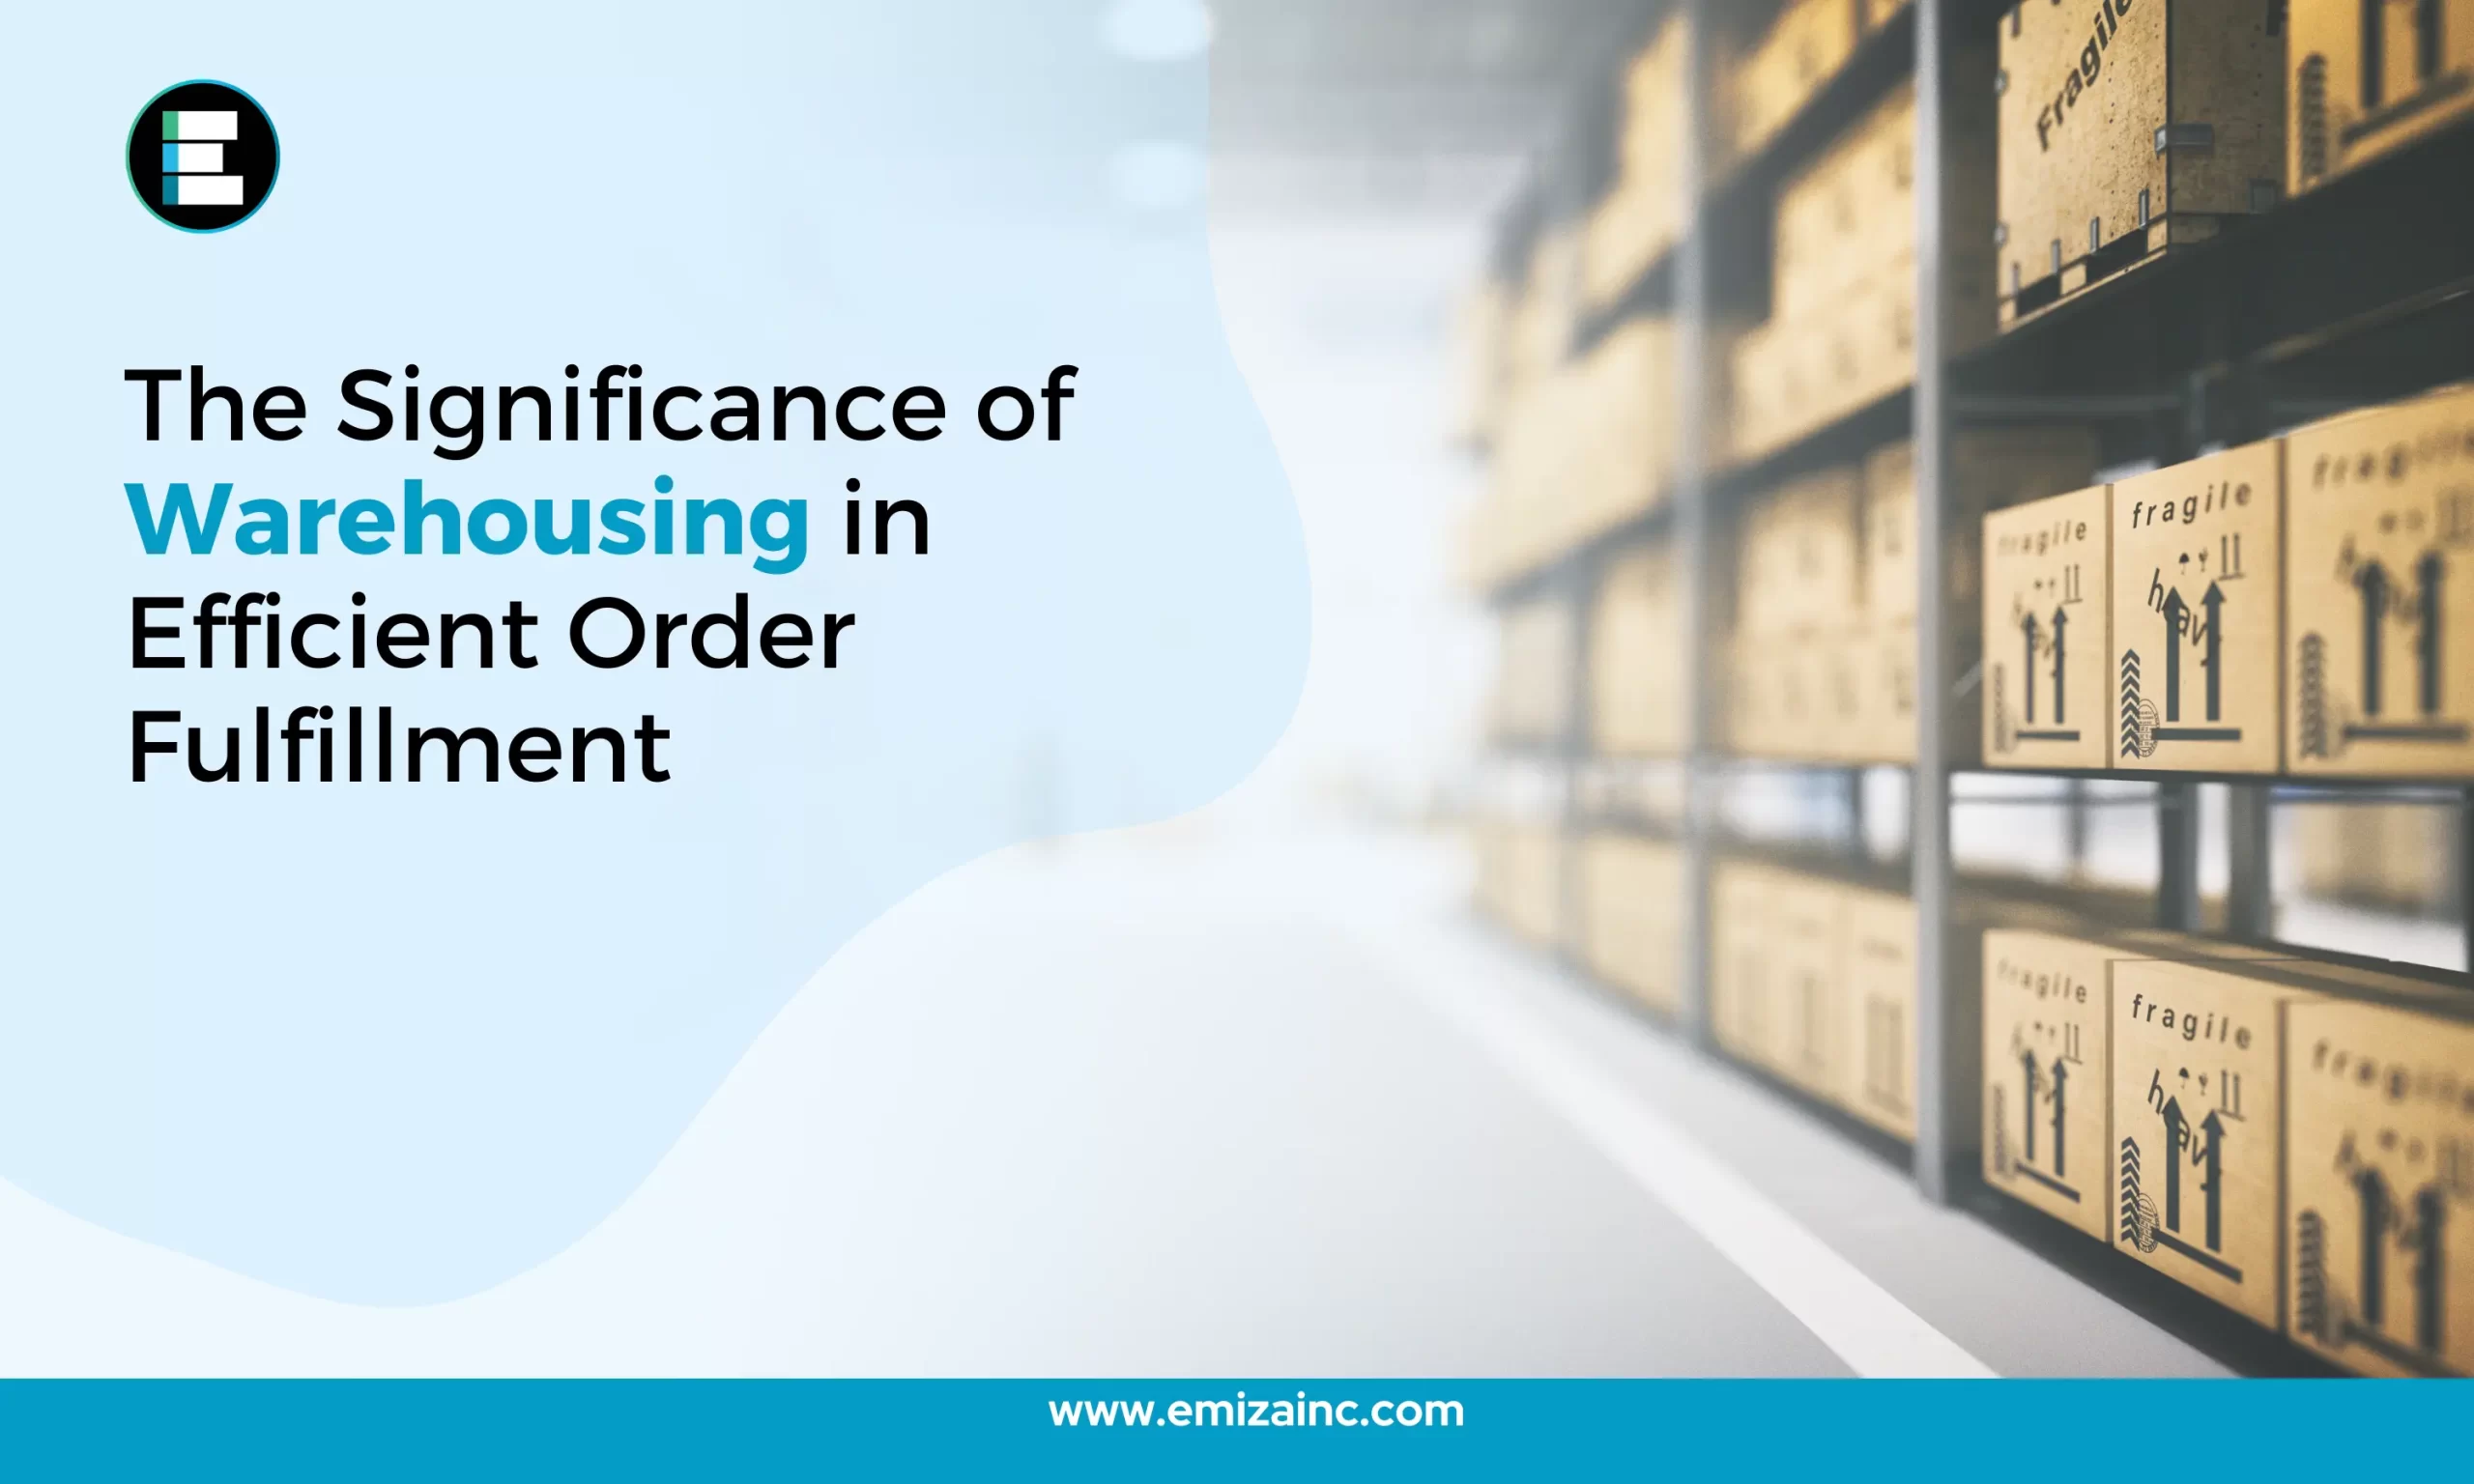 The Significance of Warehousing in Efficient Order Fulfilment